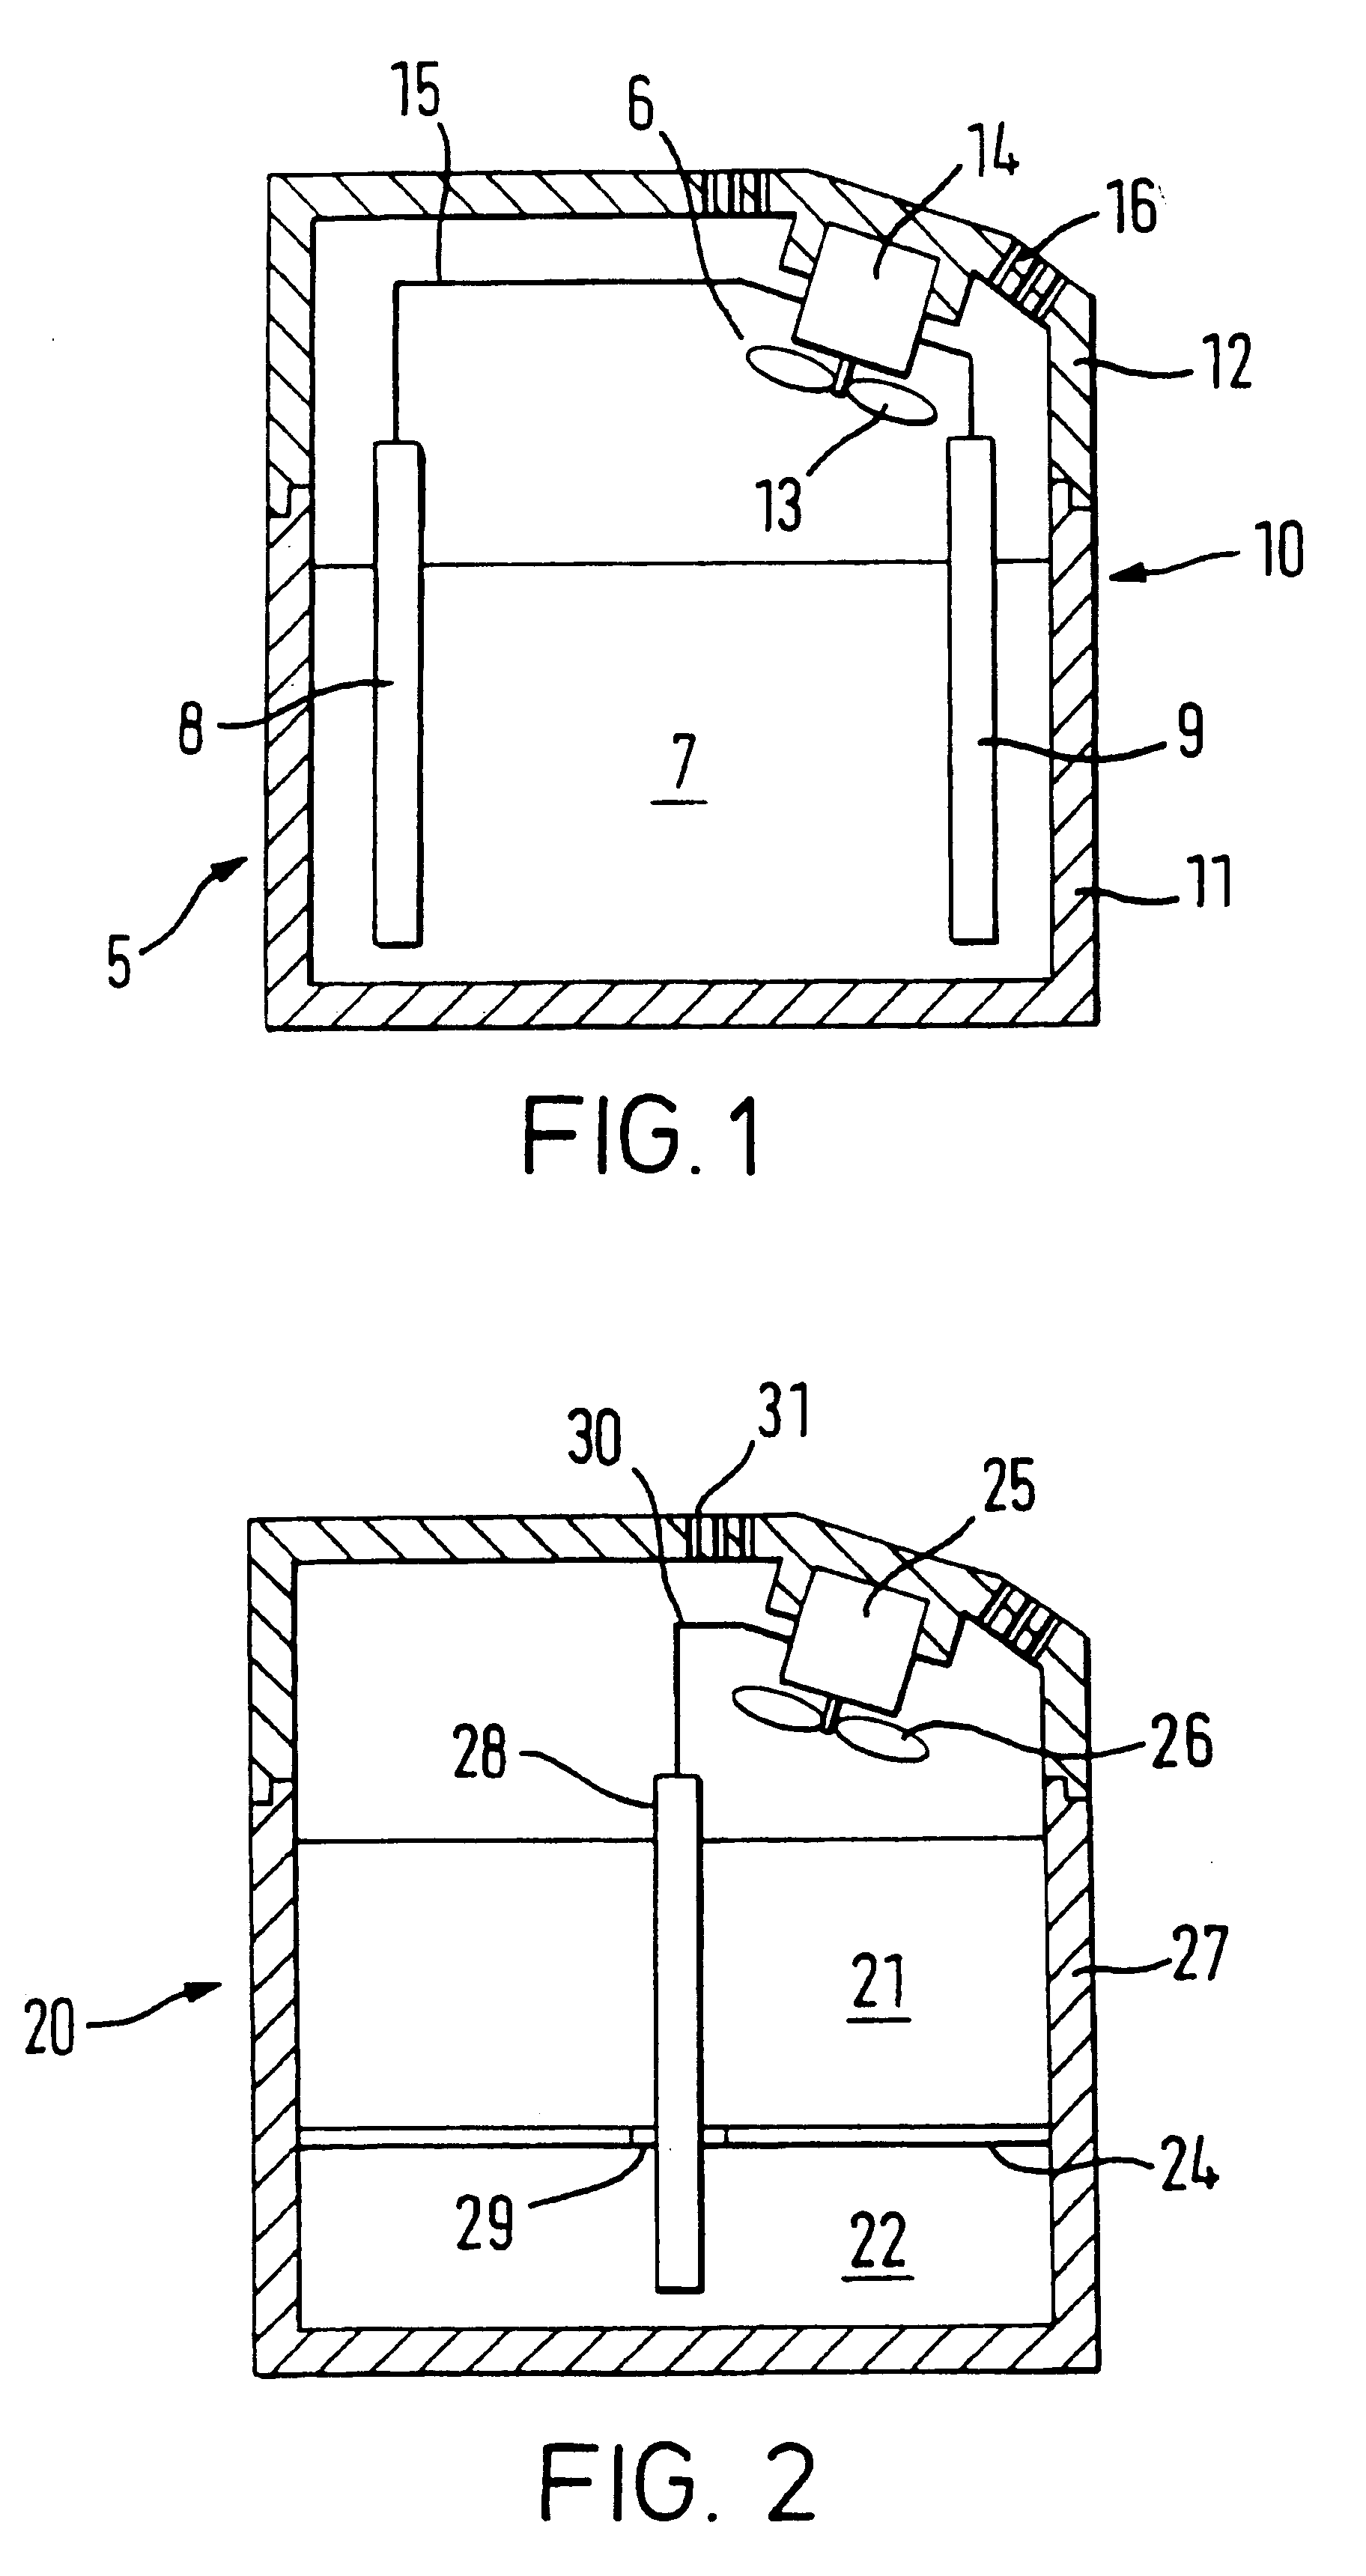 Apparatus incorporating air modifying agents